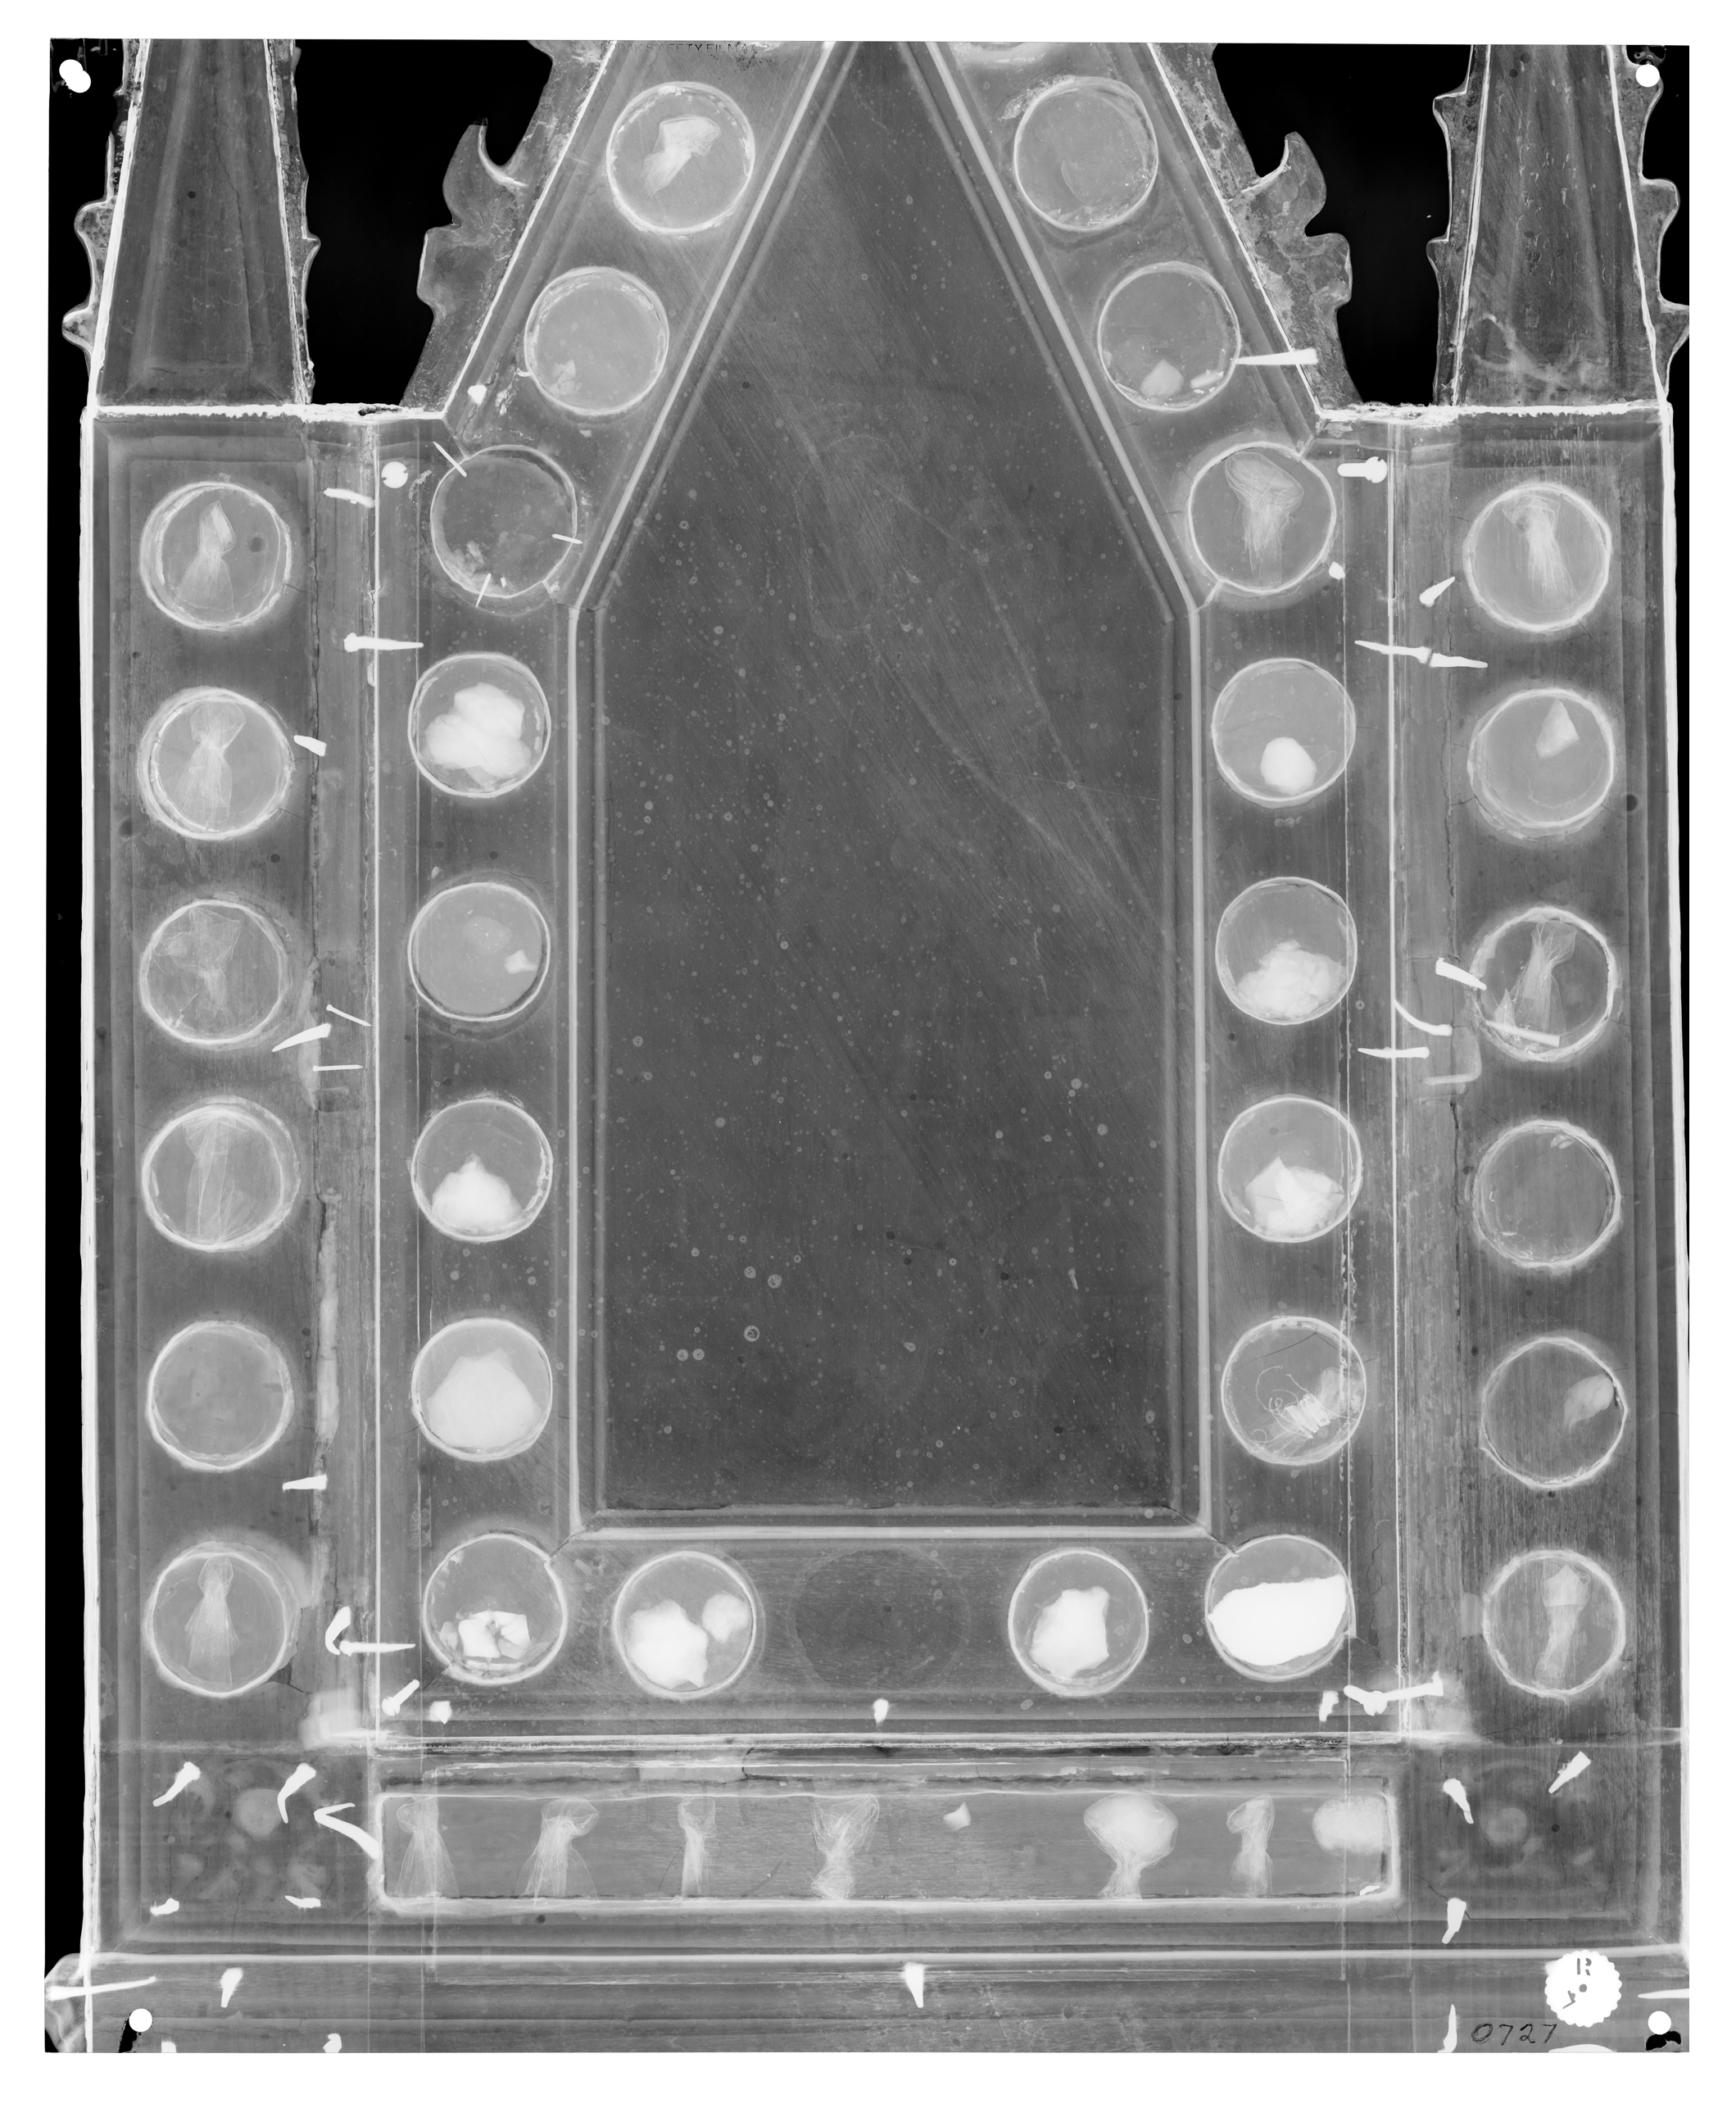 Image for Reliquary Tabernacle with the Virgin and Child